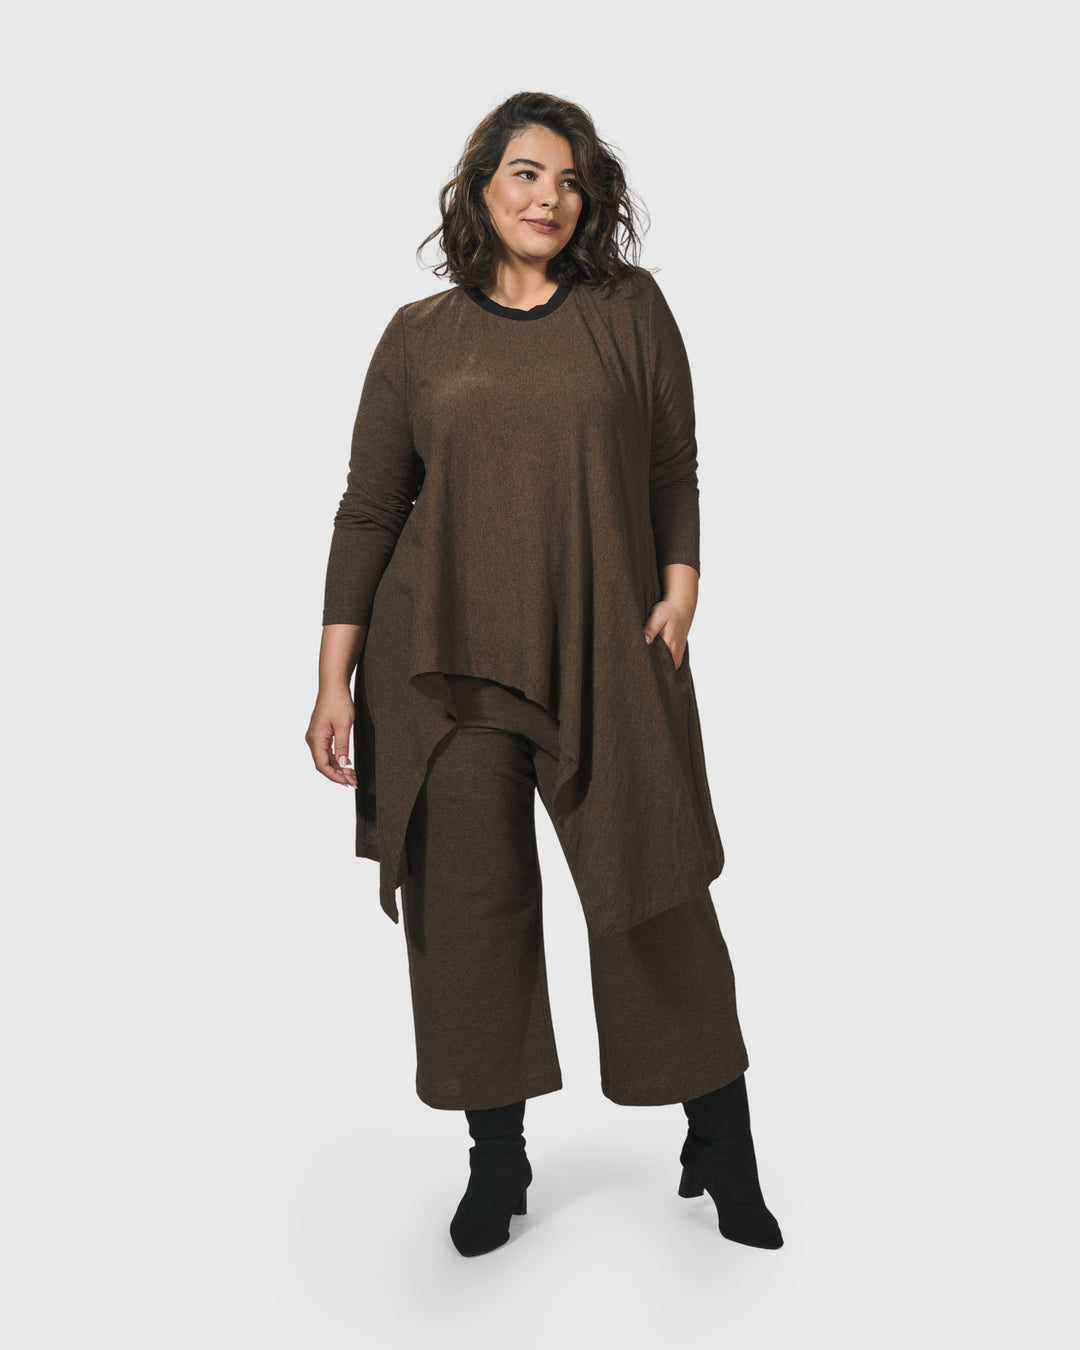 Essential Swing Tunic Top, Brown